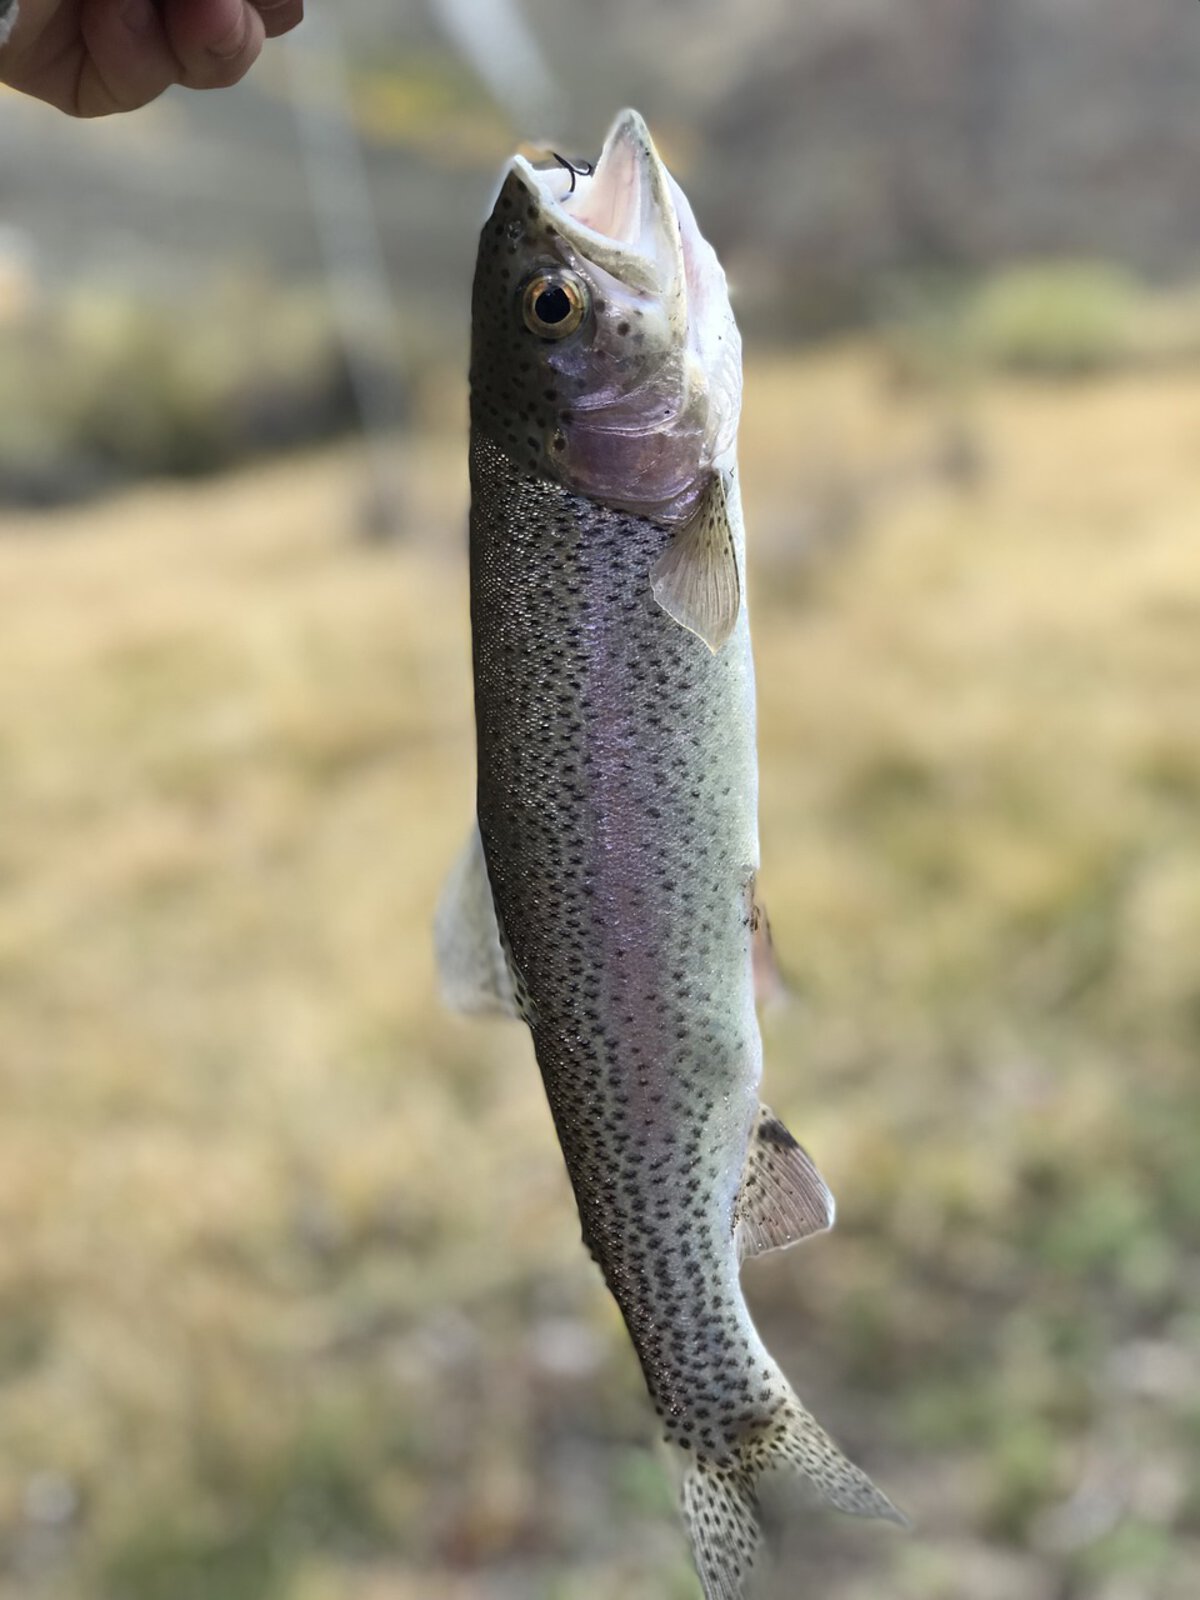 Fish Trout